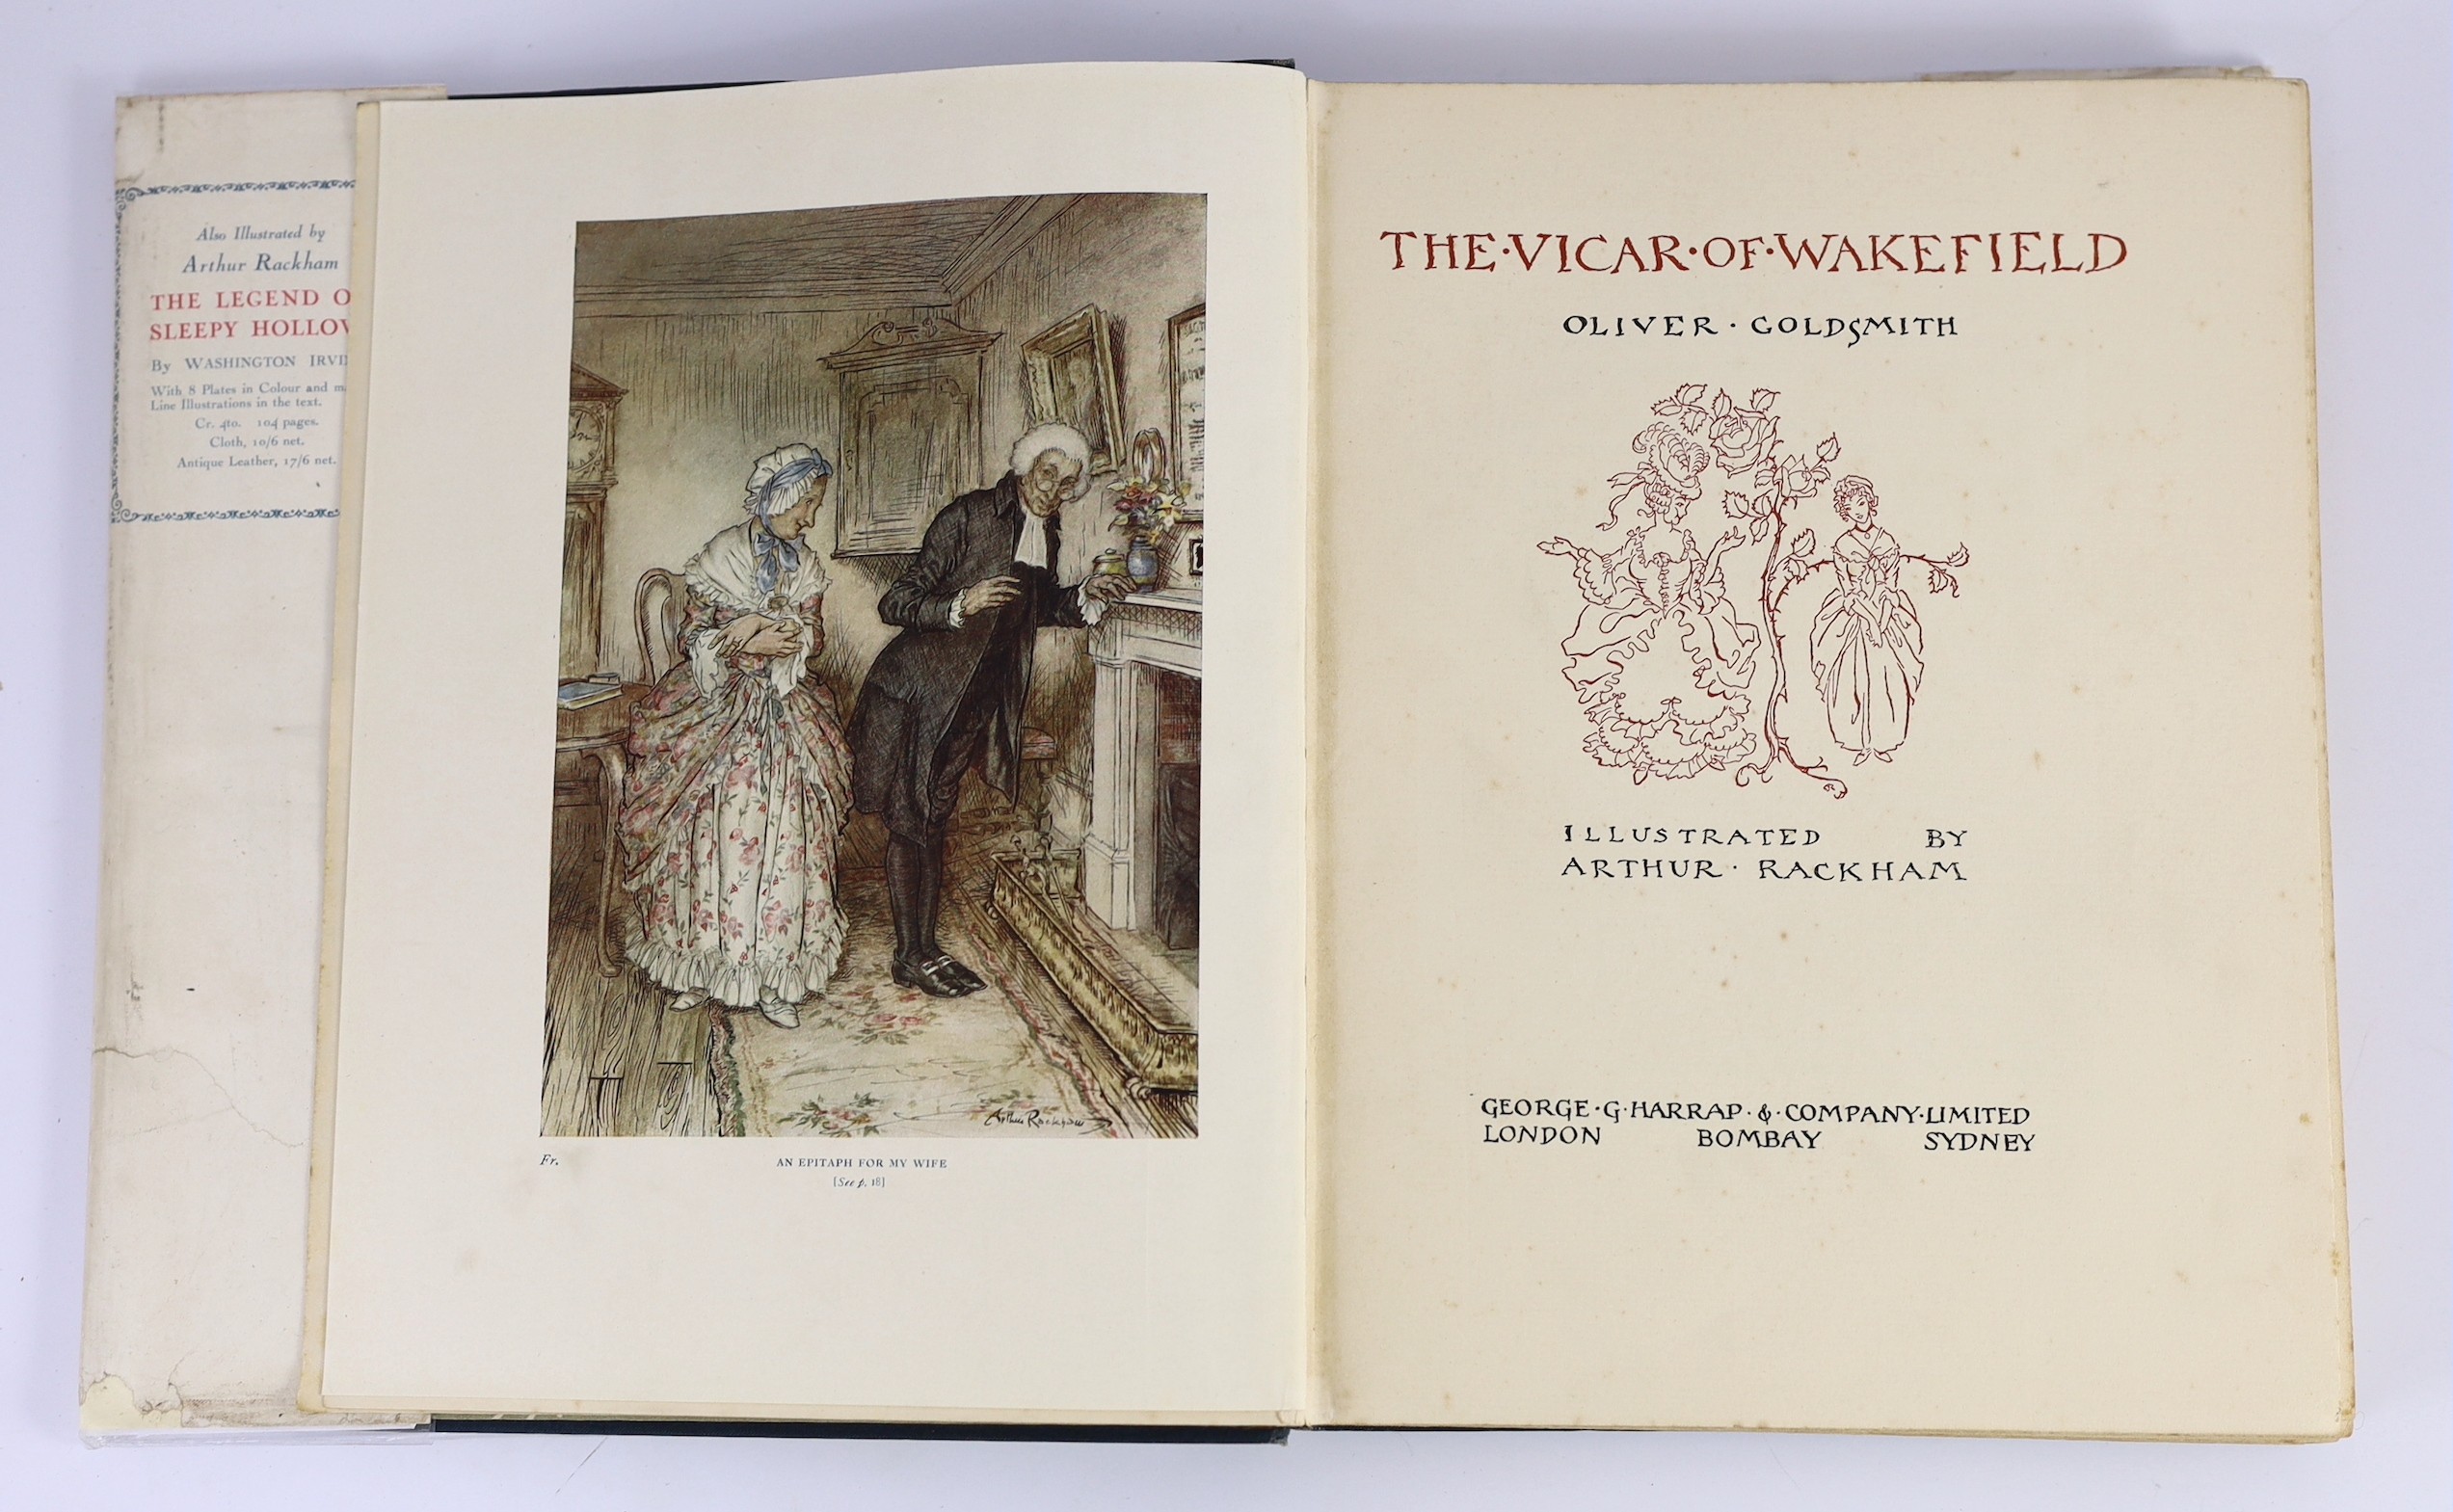 Goldsmith, Oliver - The Vicar of Wakefield, illustrated with 12 colour plates by Arthur Rackham, 4to, original cloth in d/j torn and with loss, school prize presentation inscription to half title, George G. Harrap & Co.,